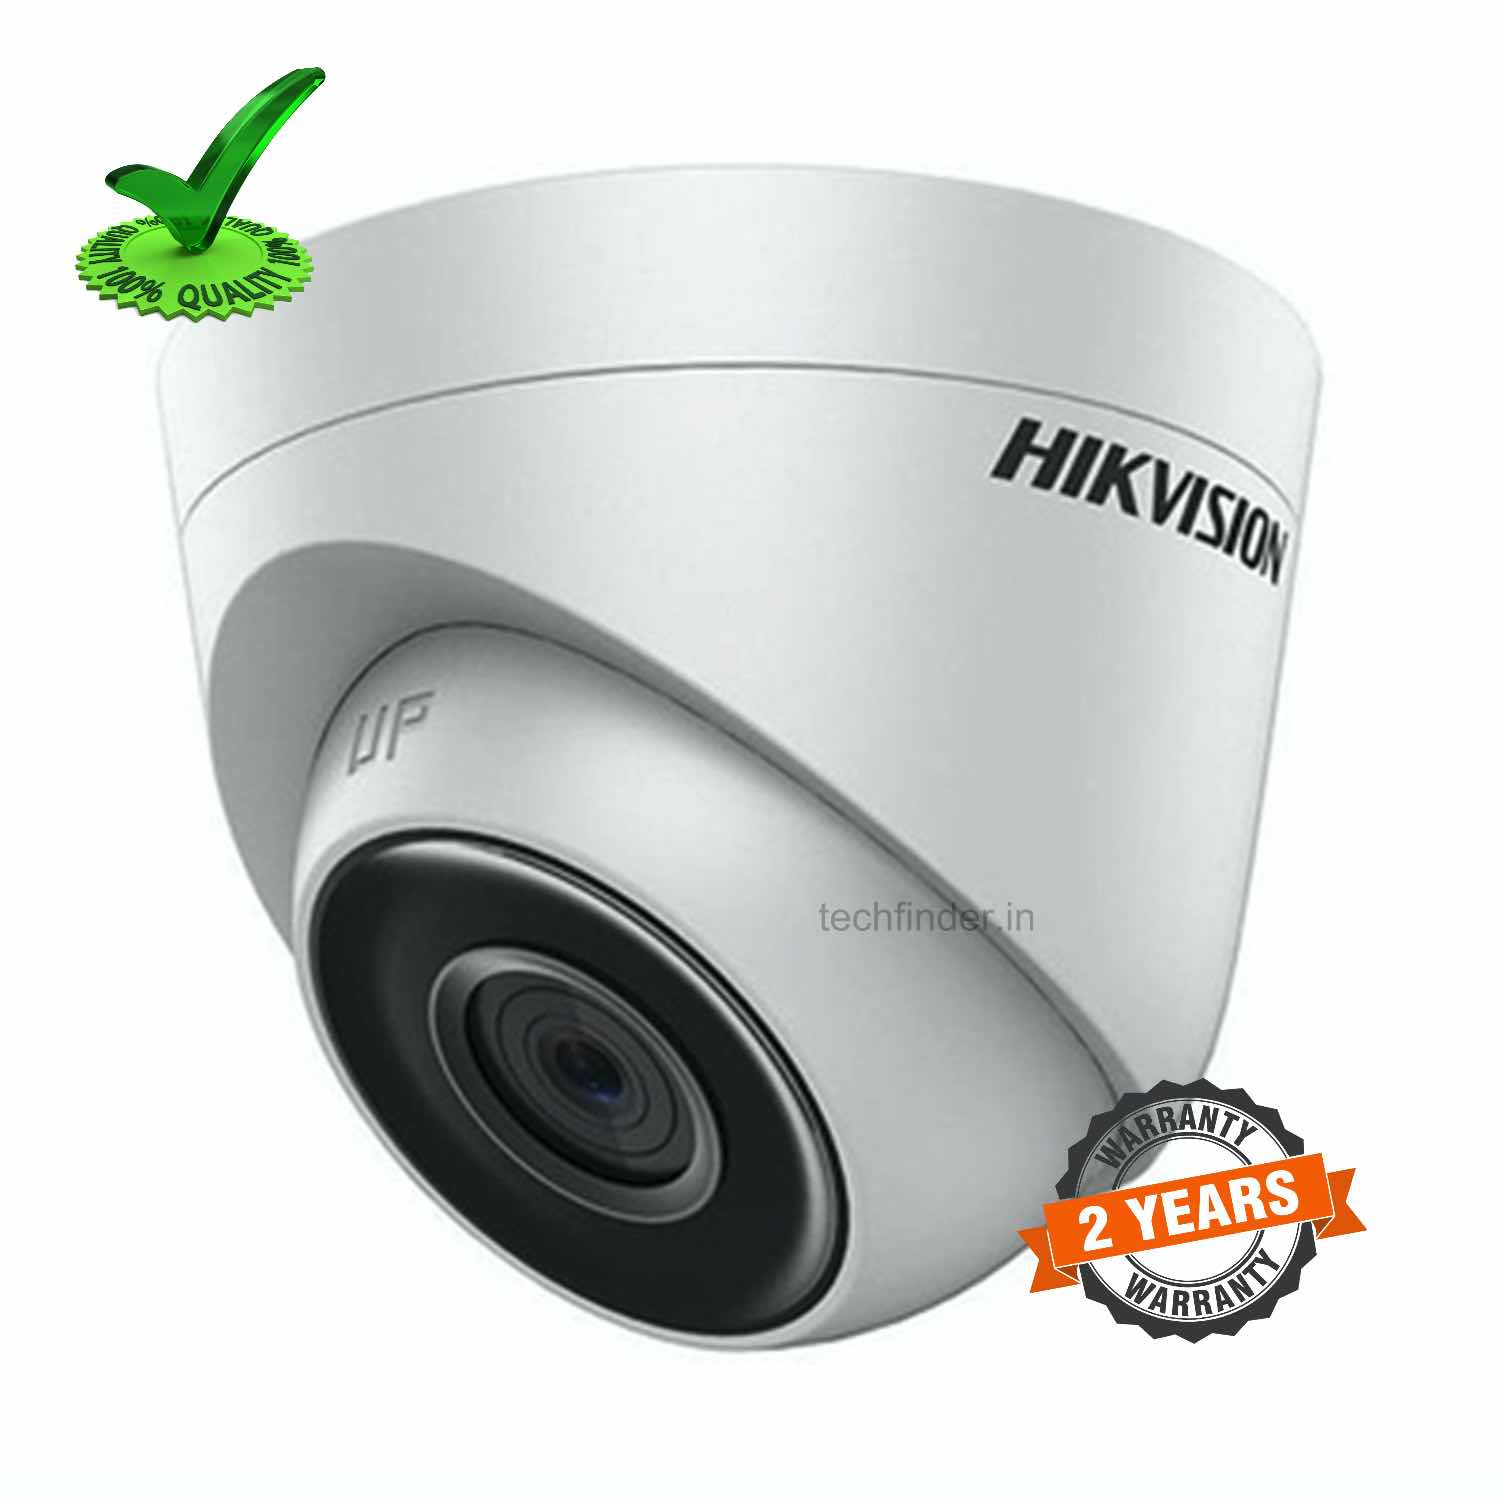 Hikvision DS 2CE56H0T ITPF 5 Mp Dome Camera